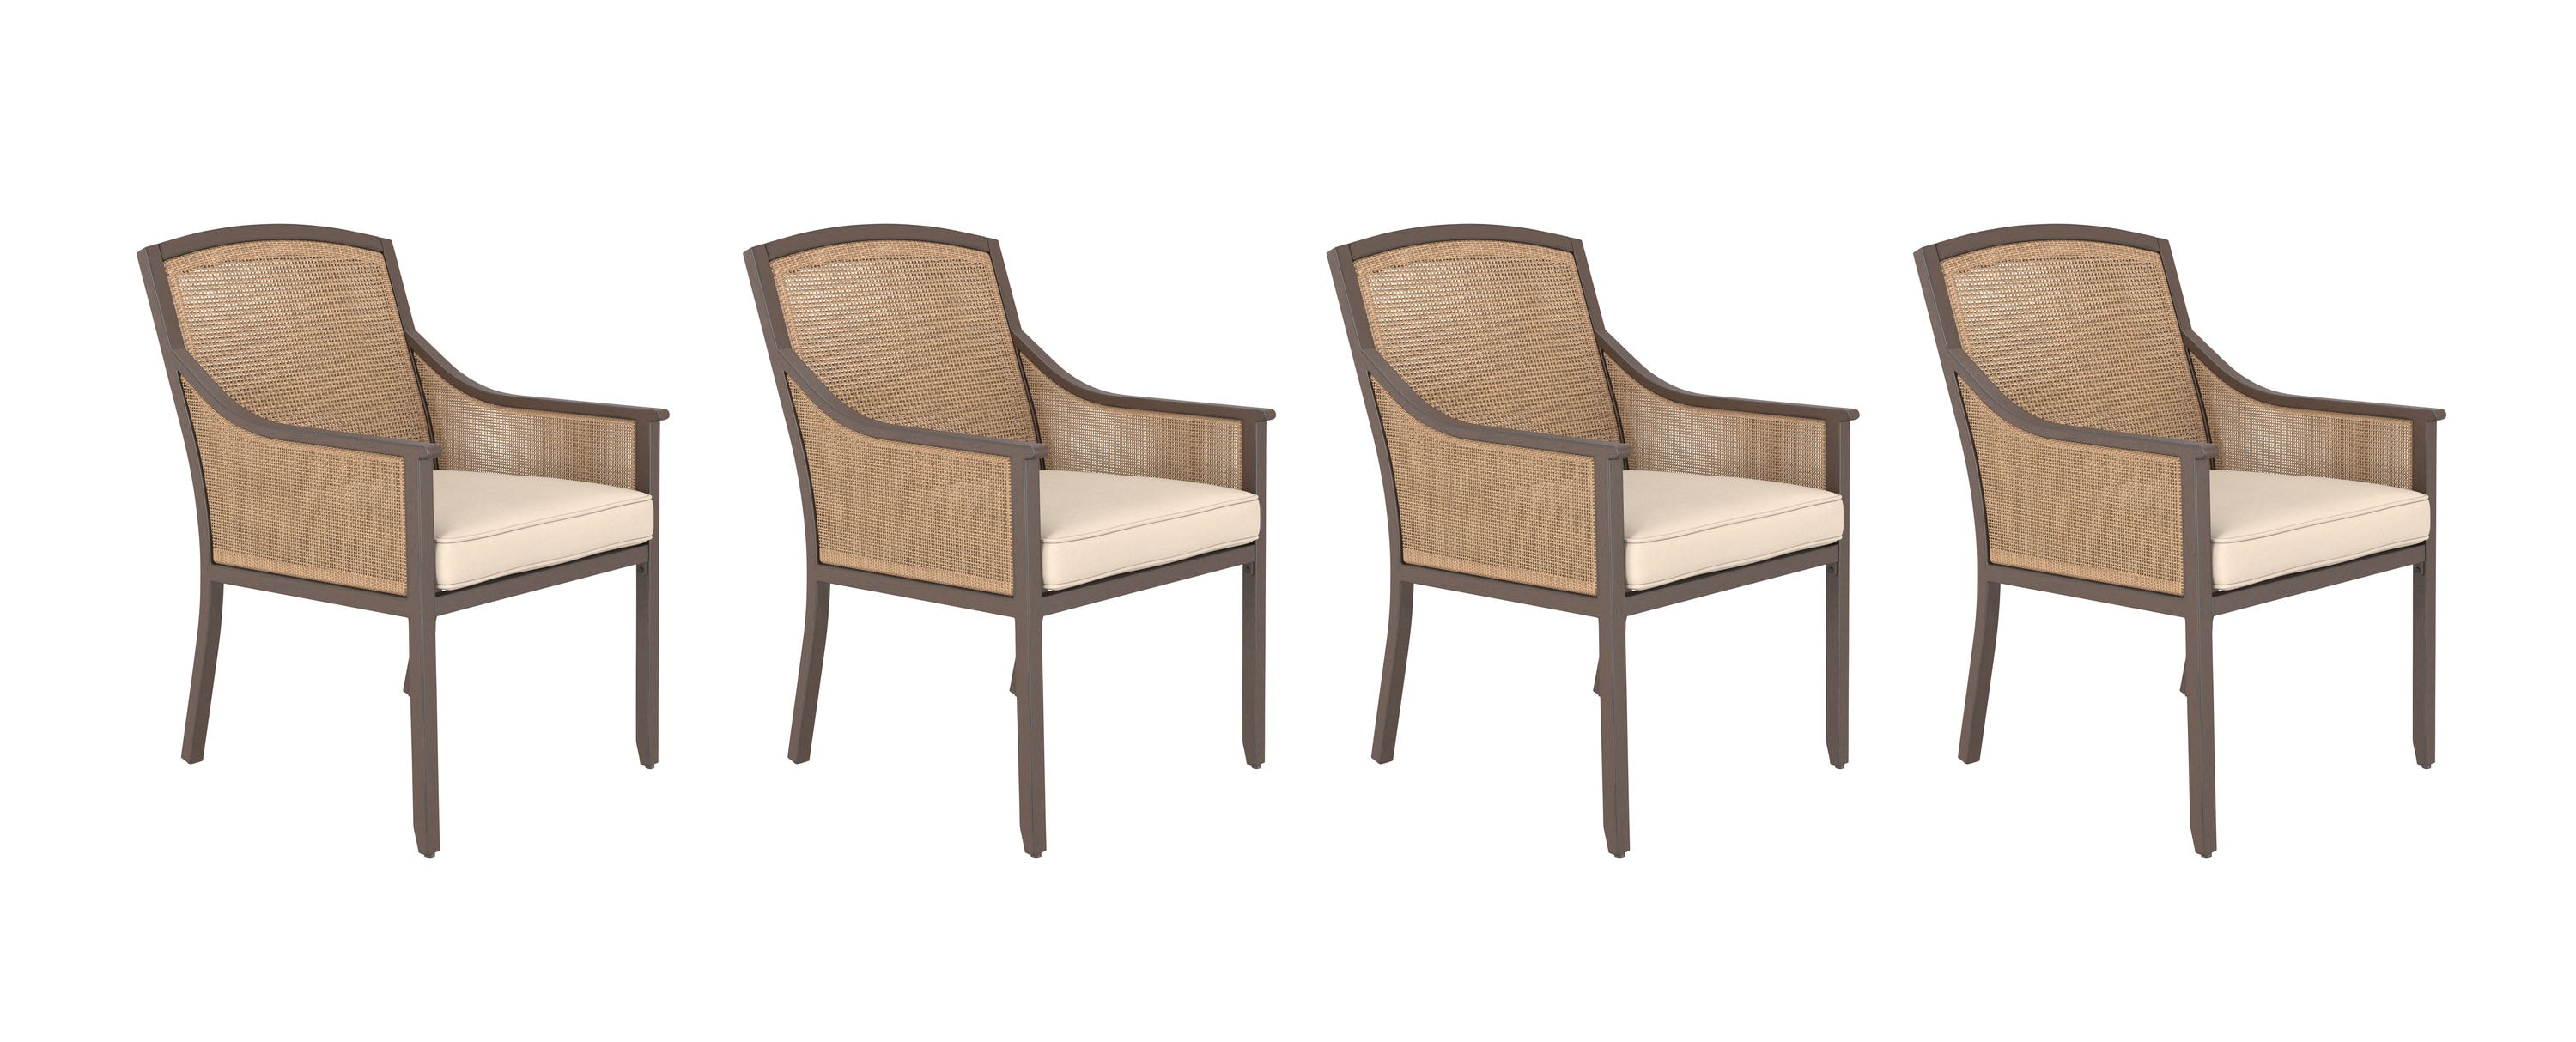 allen + roth Avent Ferry Set 4 Wicker Brown Frame Stationary Dining Chair(s) with Off-white Cushioned Seat in the Patio Chairs department at Lowes.com